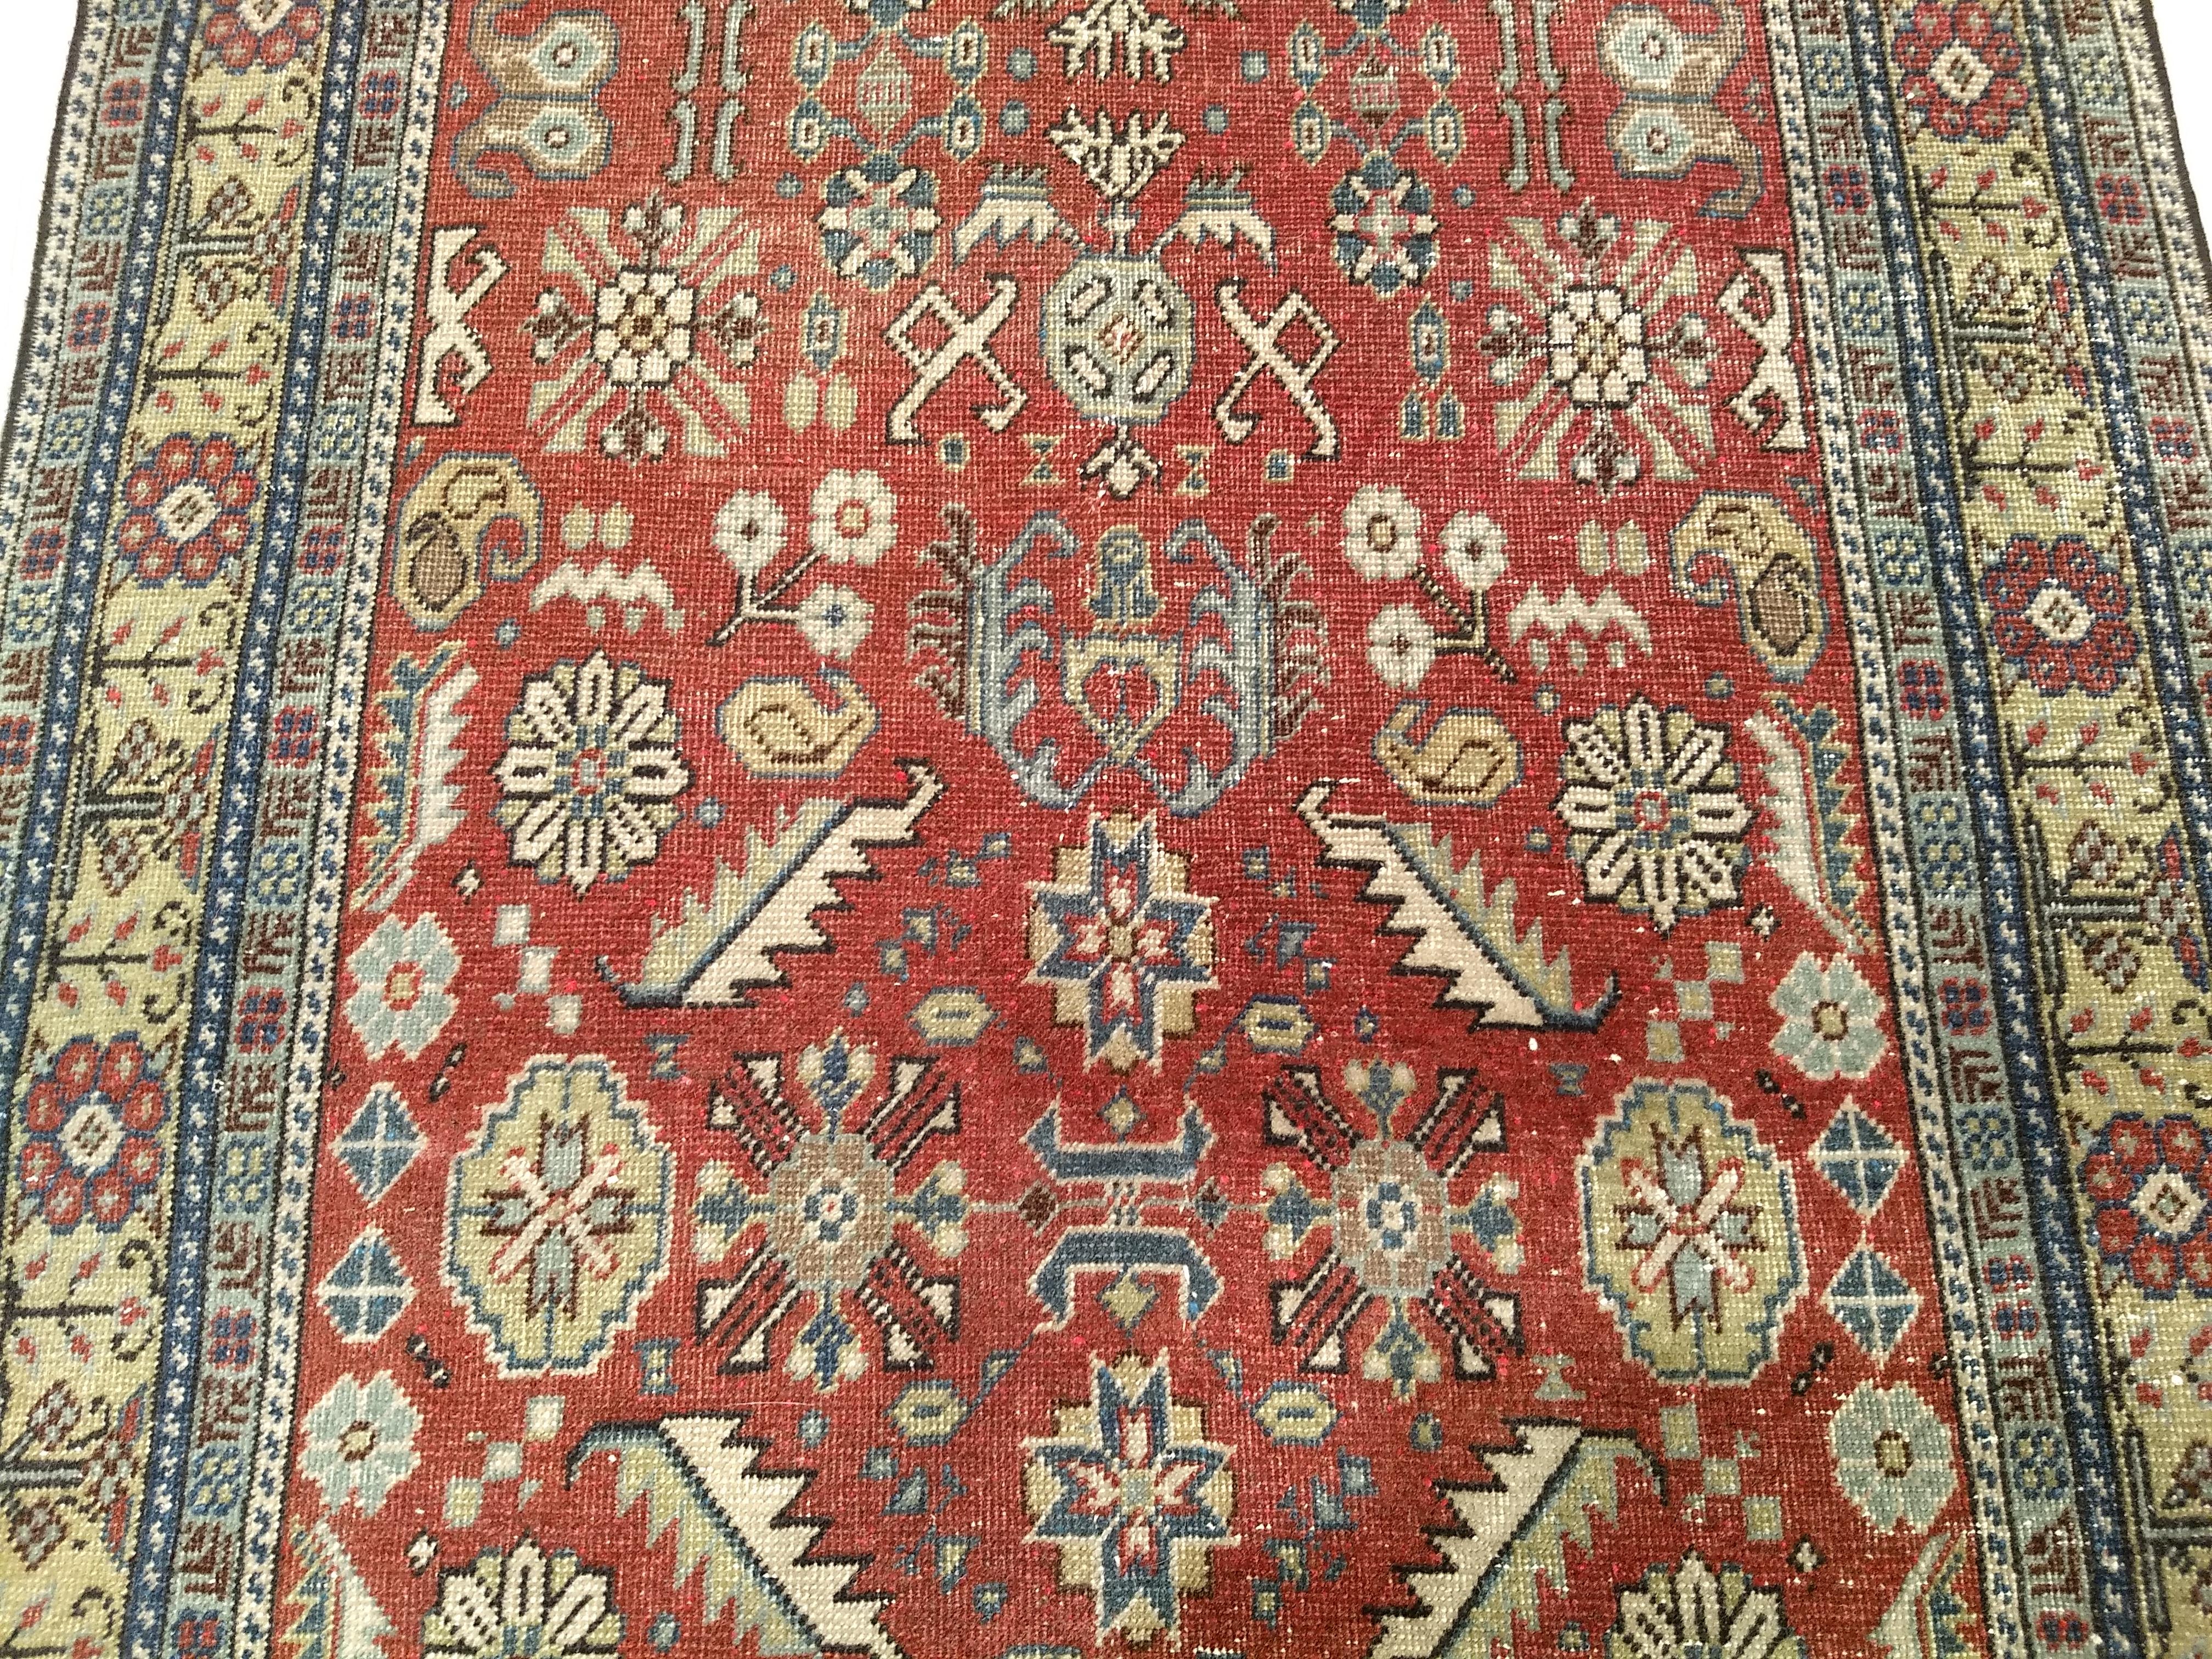 Vintage Khotan Area Rug in Allover Geometric Pattern on Brick Red, Yellow, Ivory For Sale 2